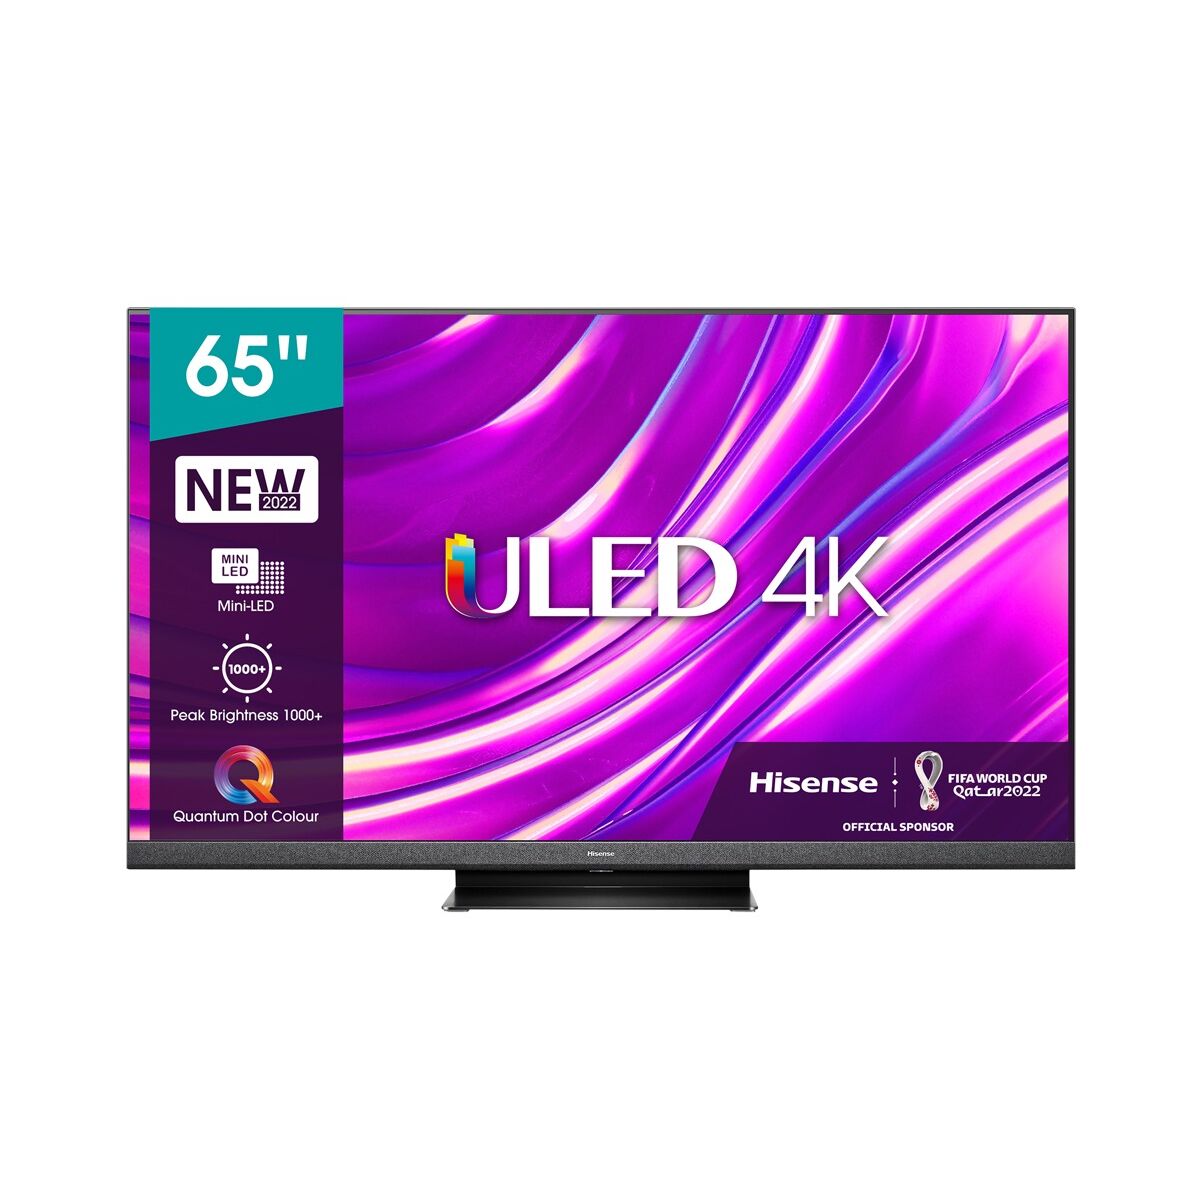 Smart TV Hisense 65U8HQ 65" 4K ULTRA HD QLED WIFI 4K Ultra HD HDR, Hisense, Electronics, TV, Video and home cinema, smart-tv-hisense-65u8hq-65-4k-ultra-hd-qled-wifi-4k-ultra-hd-hdr, :65 INCHES or 165.1 CM, :QLED, Brand_Hisense, category-reference-2609, category-reference-2625, category-reference-2931, category-reference-t-18805, category-reference-t-19653, cinema and television, Condition_NEW, entertainment, Price_900 - 1000, RiotNook